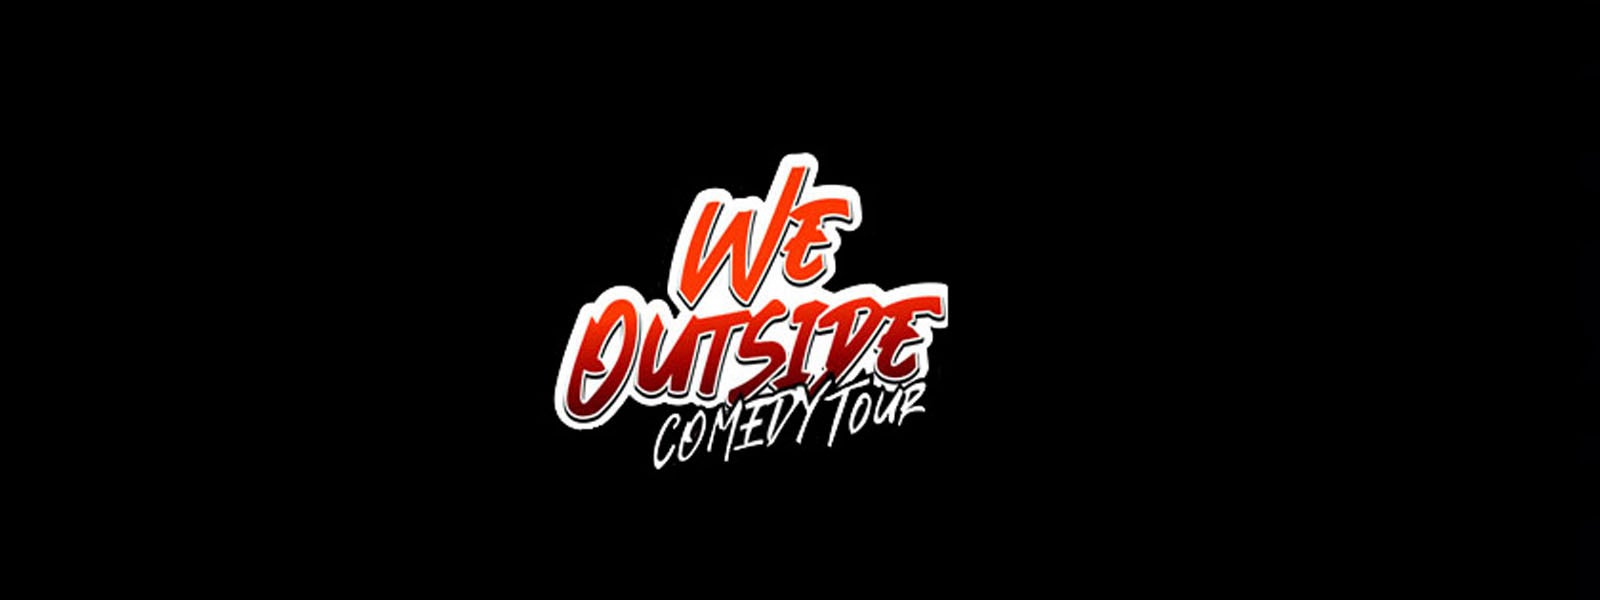 More Info for POSTPONED - "We Outside" Comedy Tour